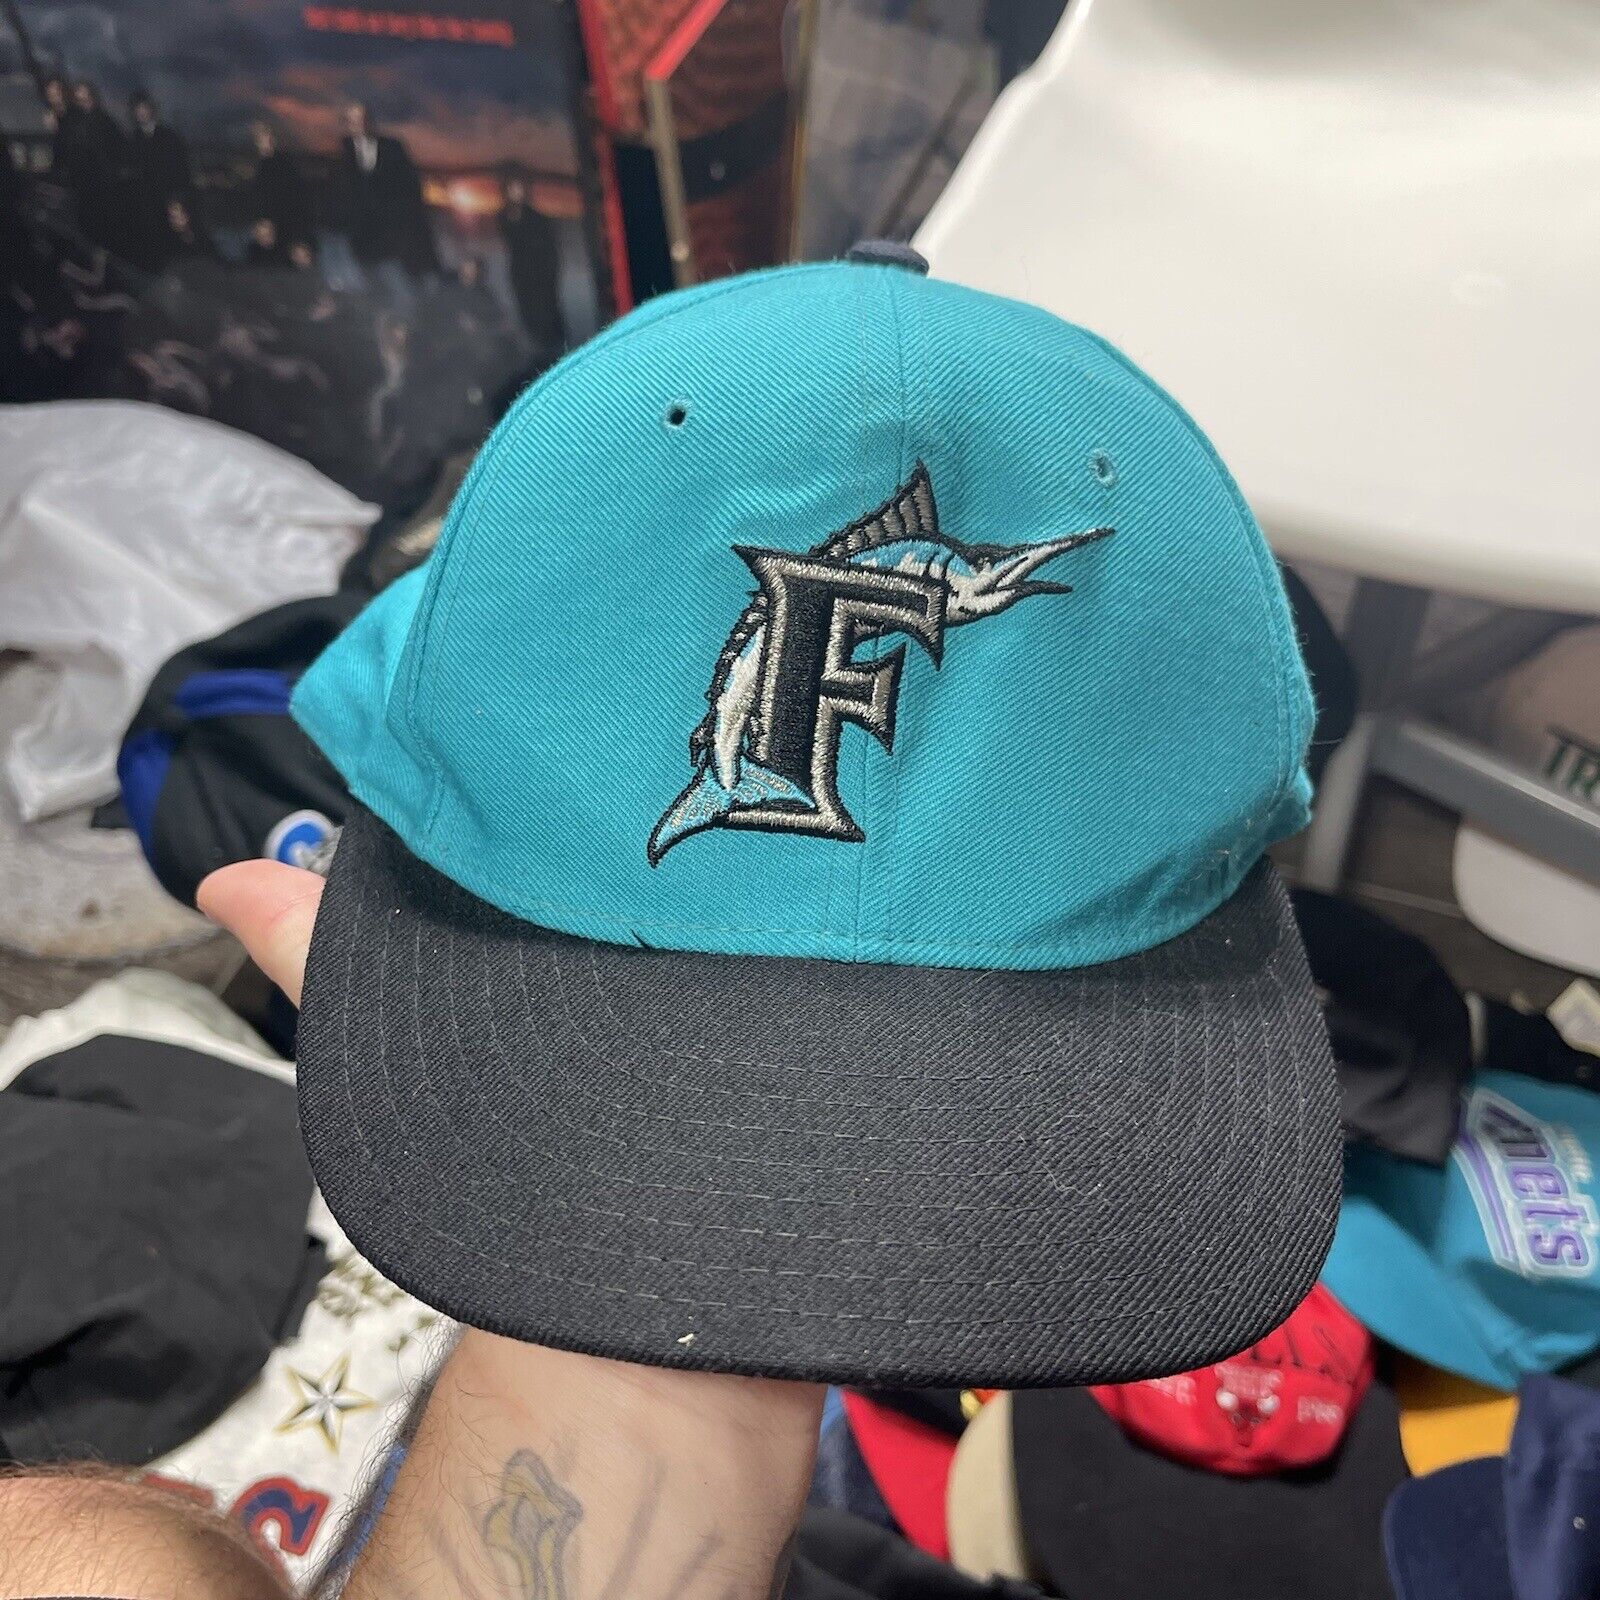 Florida Marlins Fitted 7 1/4 New Era Pro Model Wool Hat